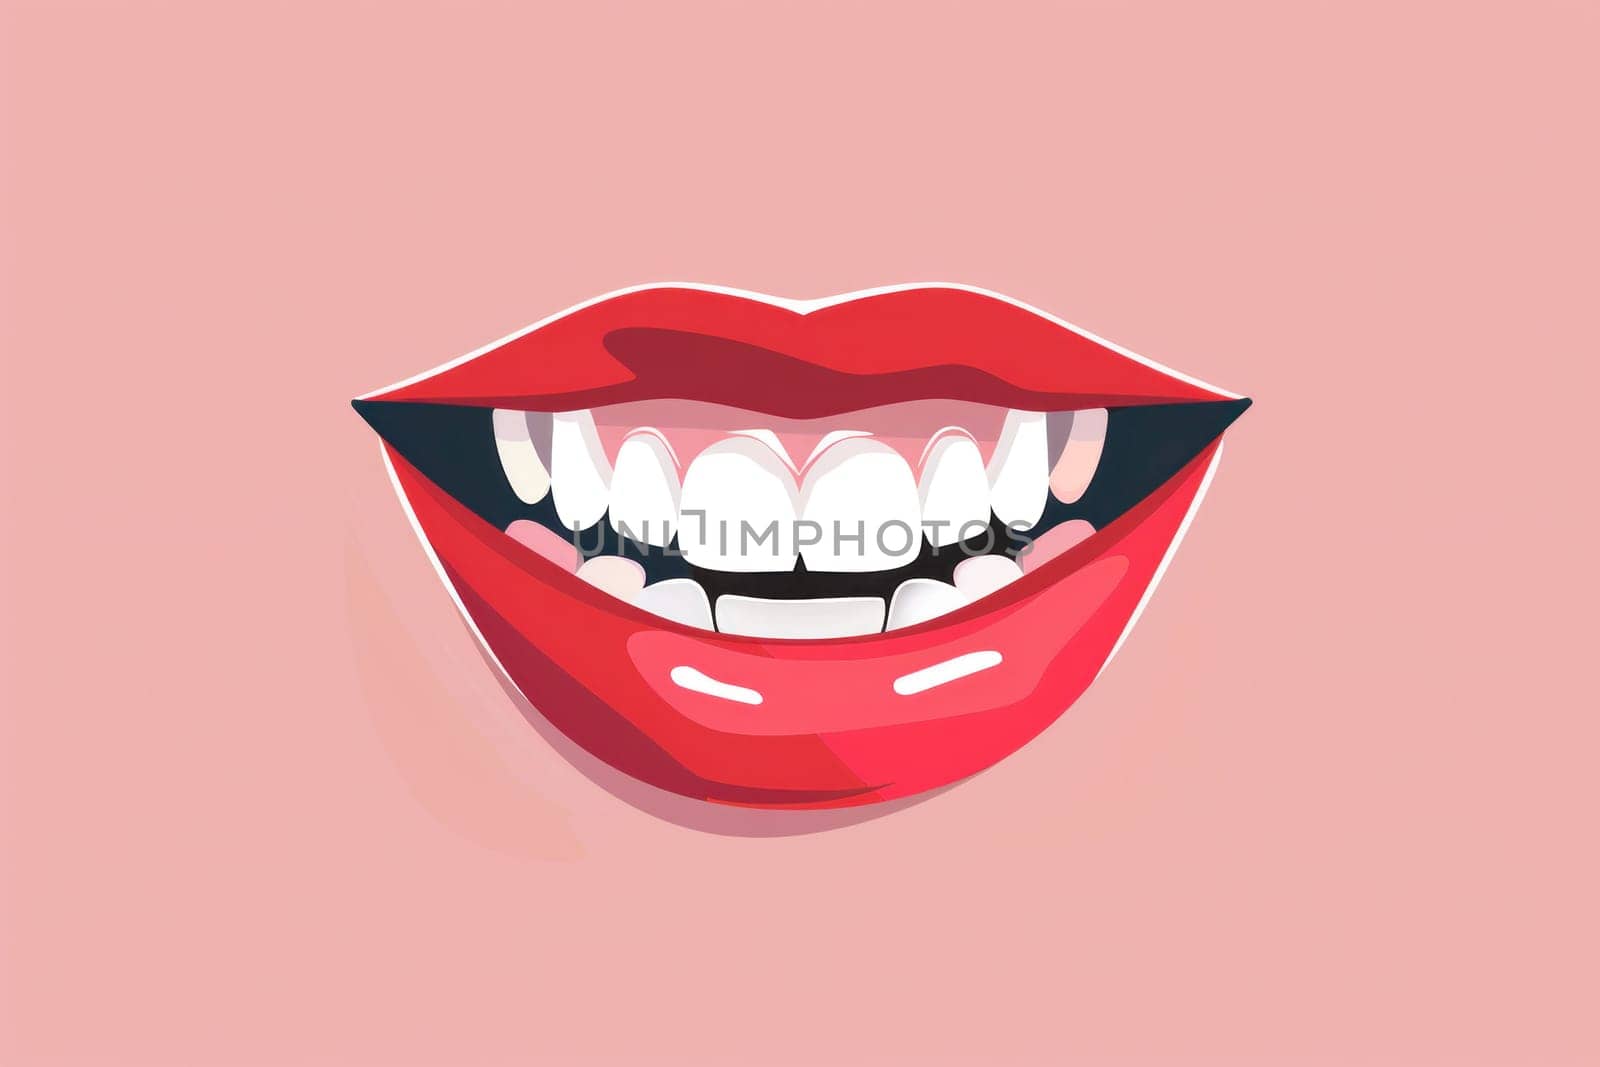 Fashionable woman's mouth with perfect white teeth and red lips on pink background illustration for beauty and dental concepts by Vichizh